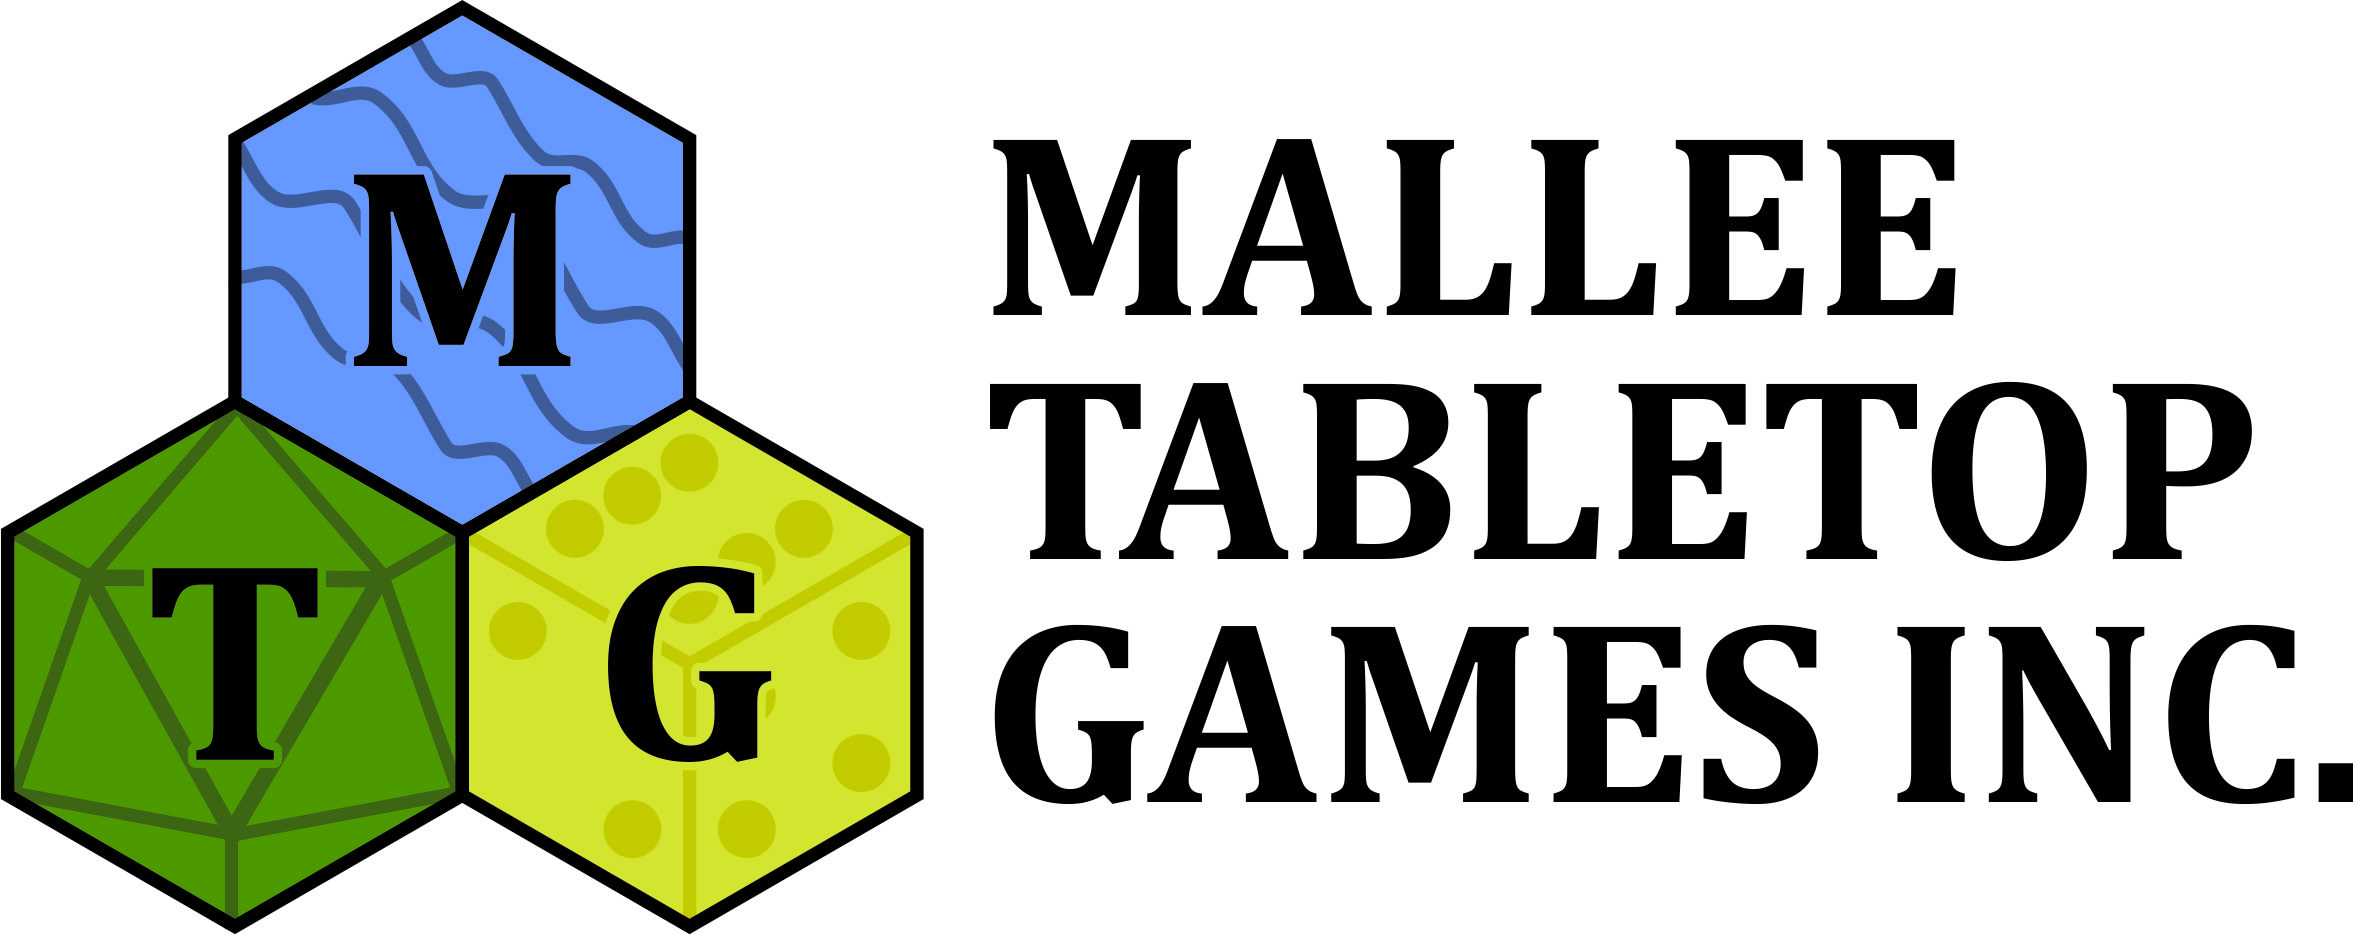 Mallee Tabletop Games Inc.